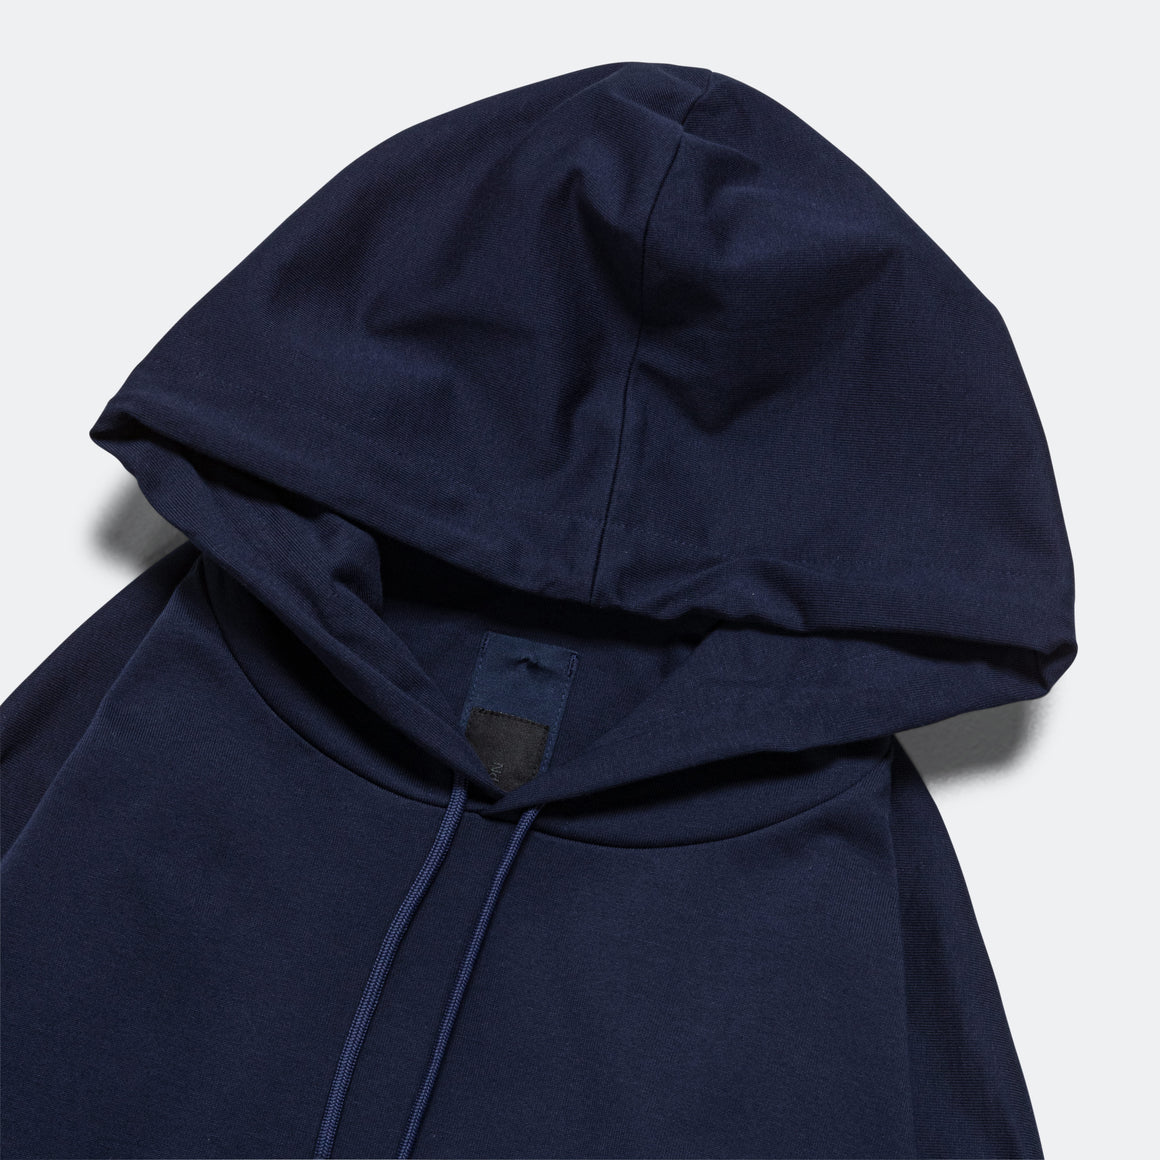 Nike - ESC Knit Pullover Hoodie - Midnight Navy - UP THERE